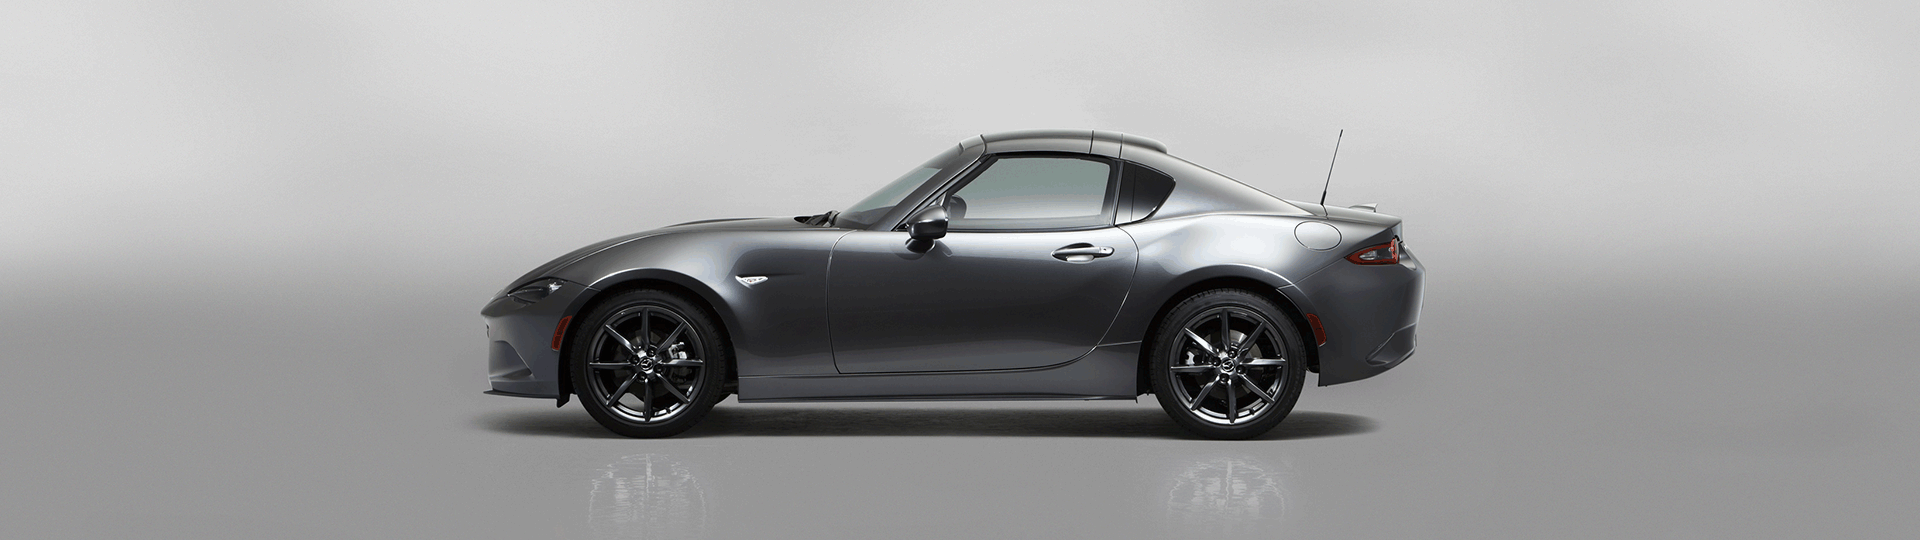 2017-mazda-mx-5-rf-exterior-side-view